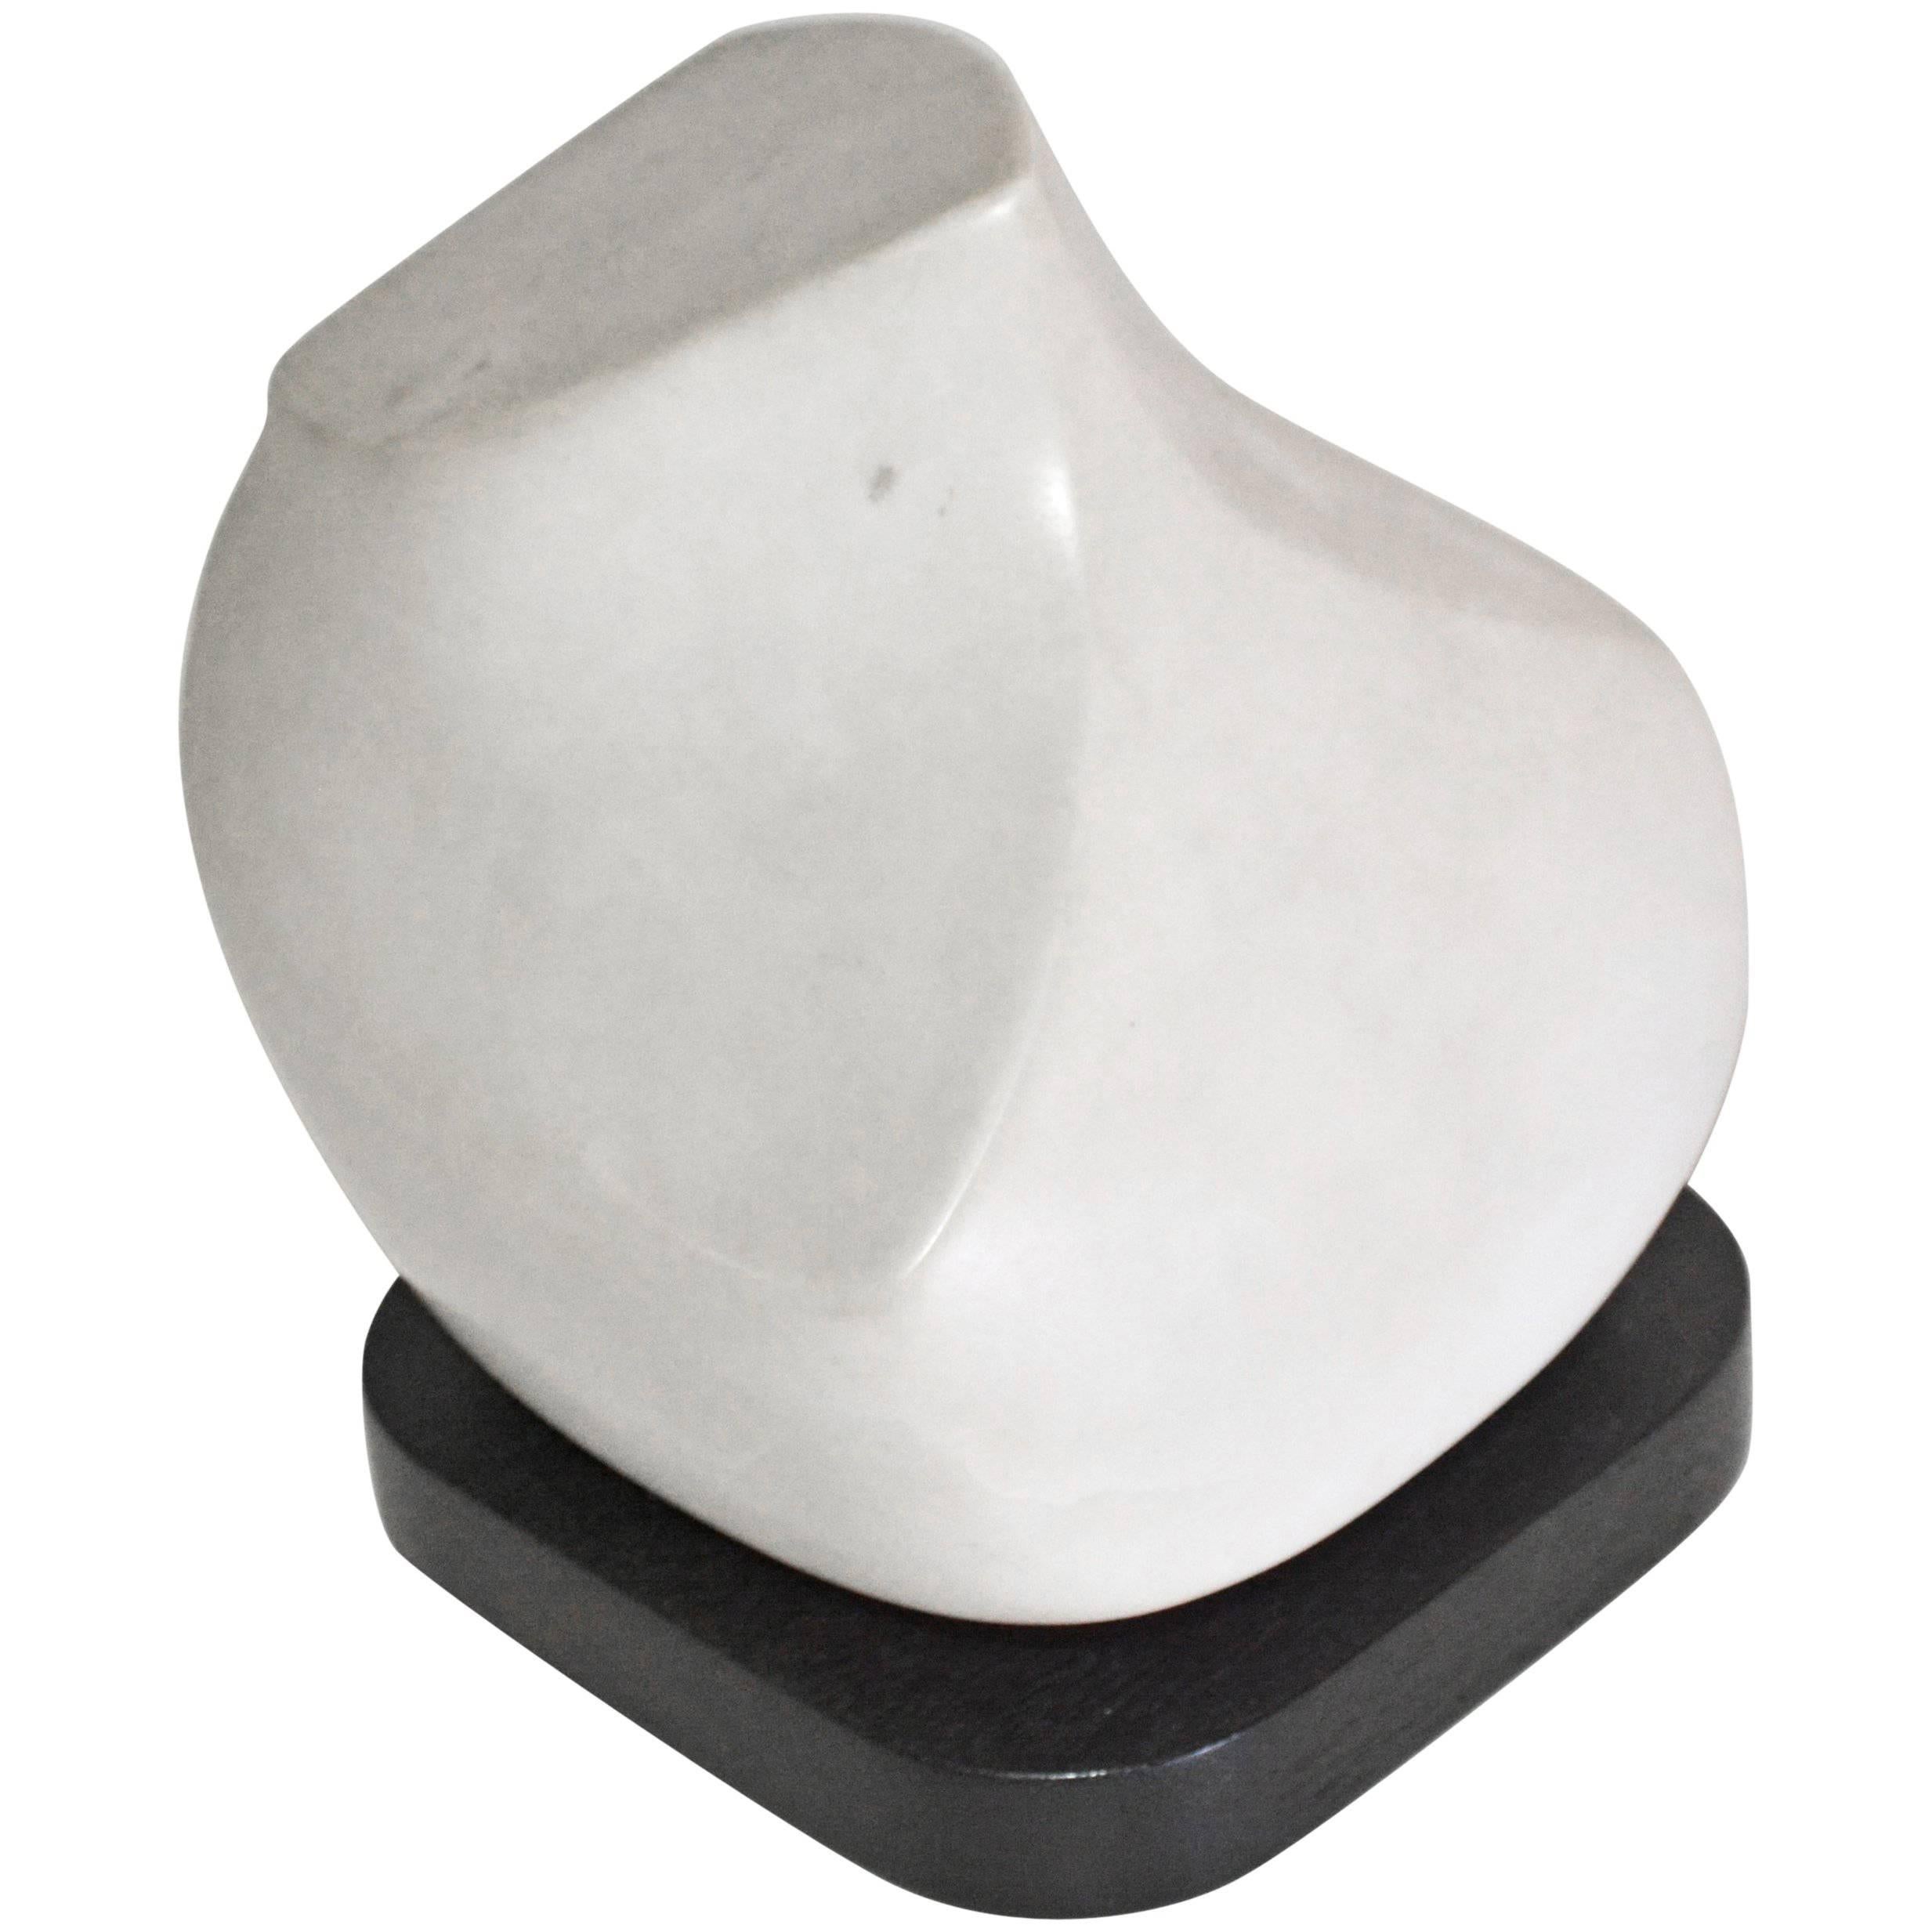 Petite White Marble Sculpture on Stand For Sale